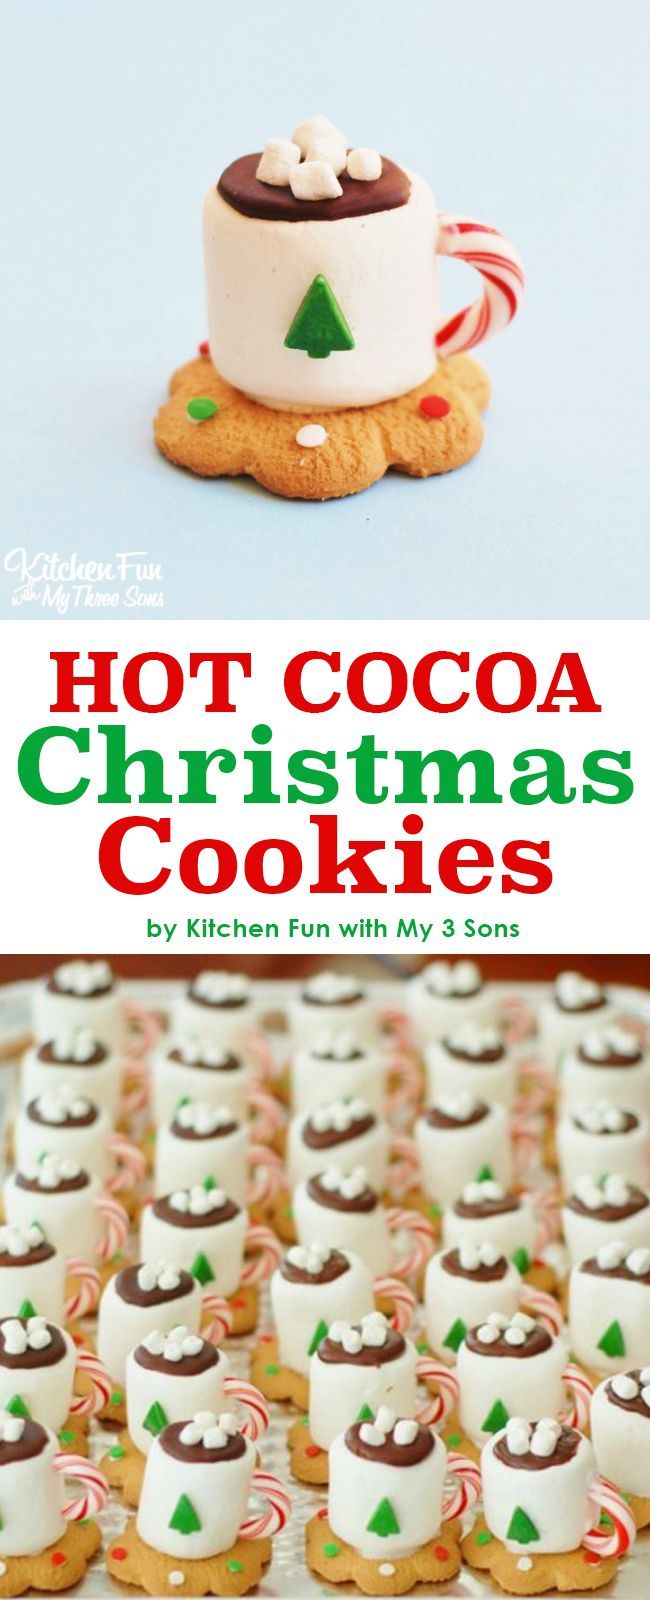 Adorable Hot Cocoa Christmas Cookies made with marshmallows. Looks just like a tin